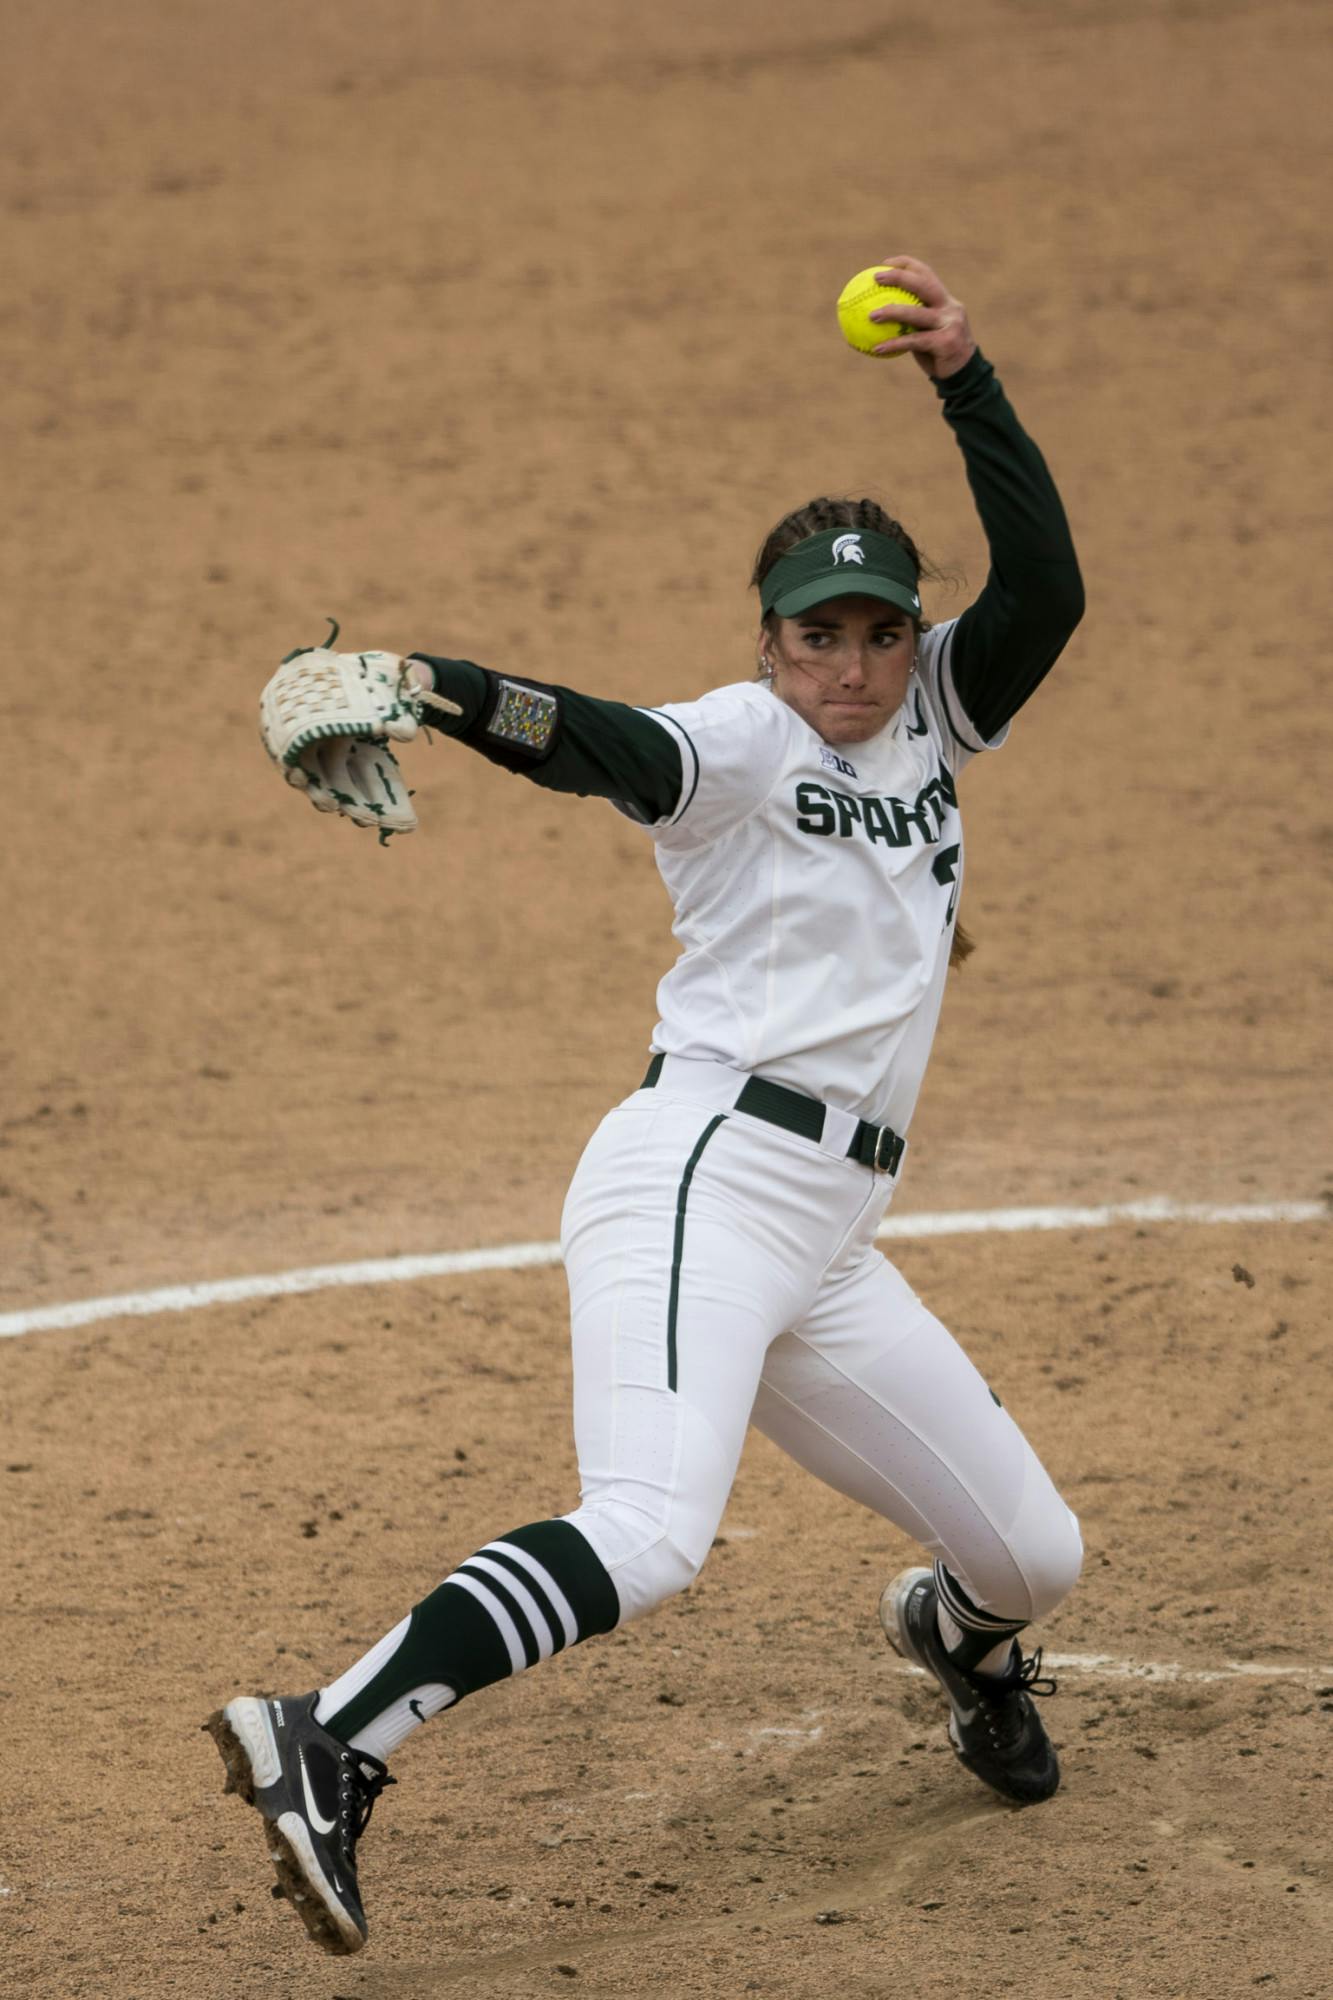 Sophomore pitcher Sarah Ladd (20) throws a pitch during the game against Rutgers on March 28, 2021, at Secchia Stadium. The Spartans defeated the Scarlet Knights 4-1.